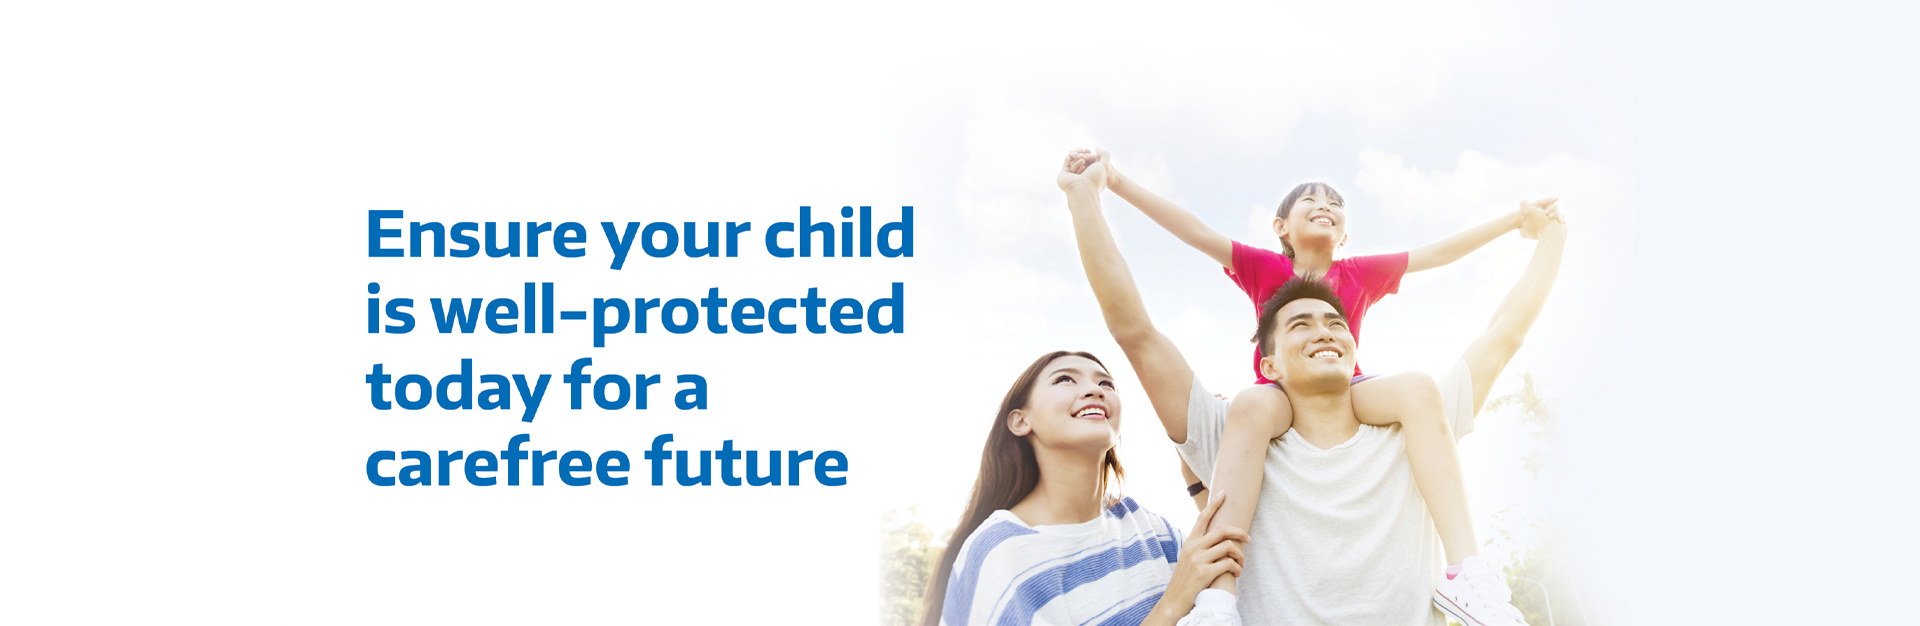 Ensure Your Child Is Well-Protected